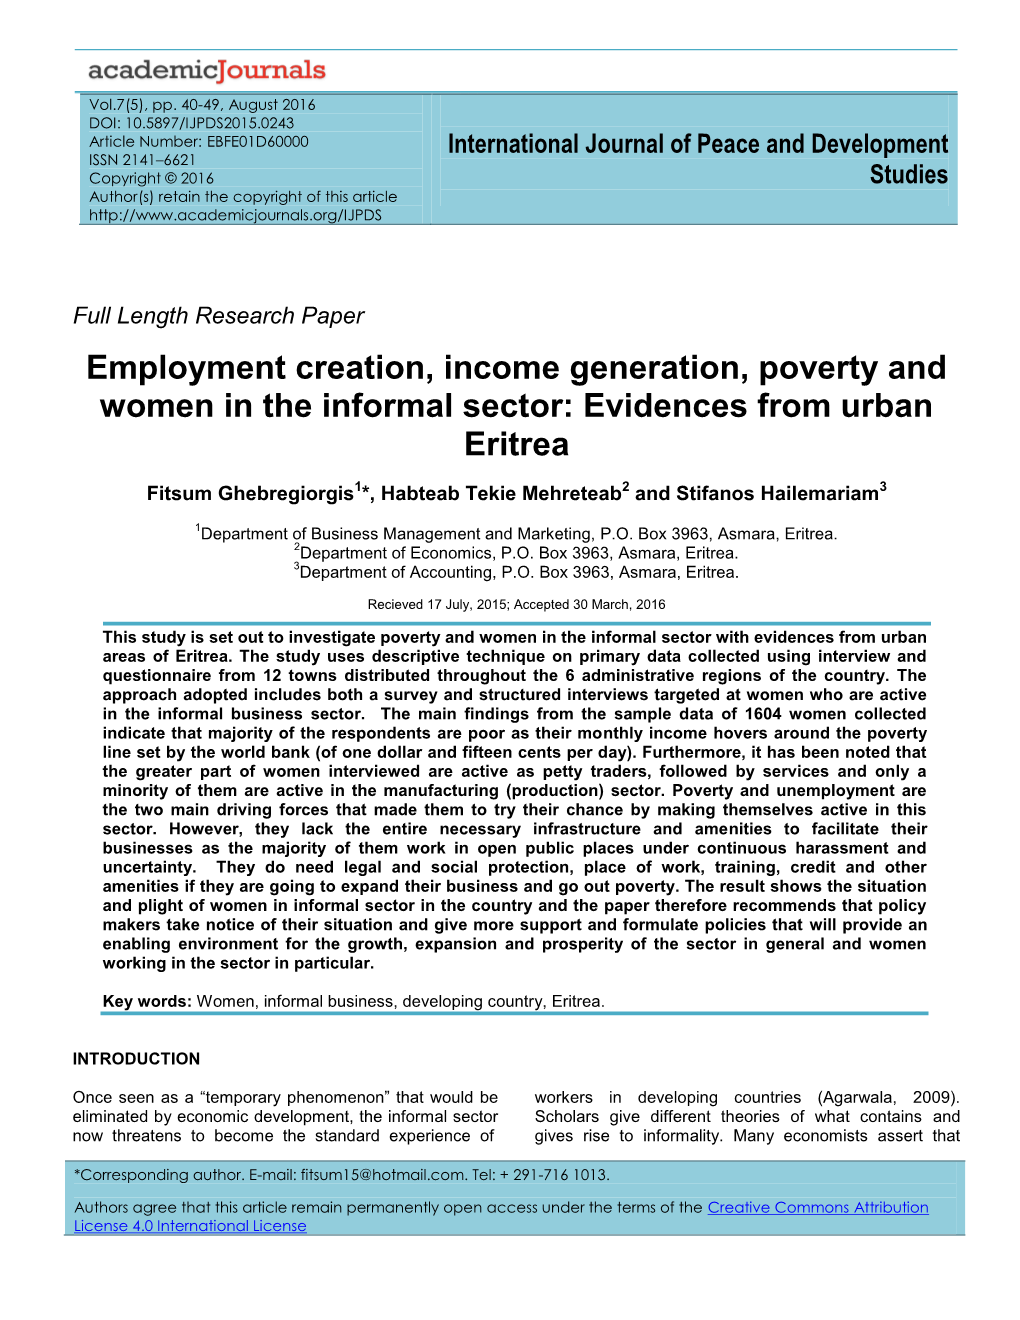 Employment Creation, Income Generation, Poverty and Women in the Informal Sector: Evidences from Urban Eritrea